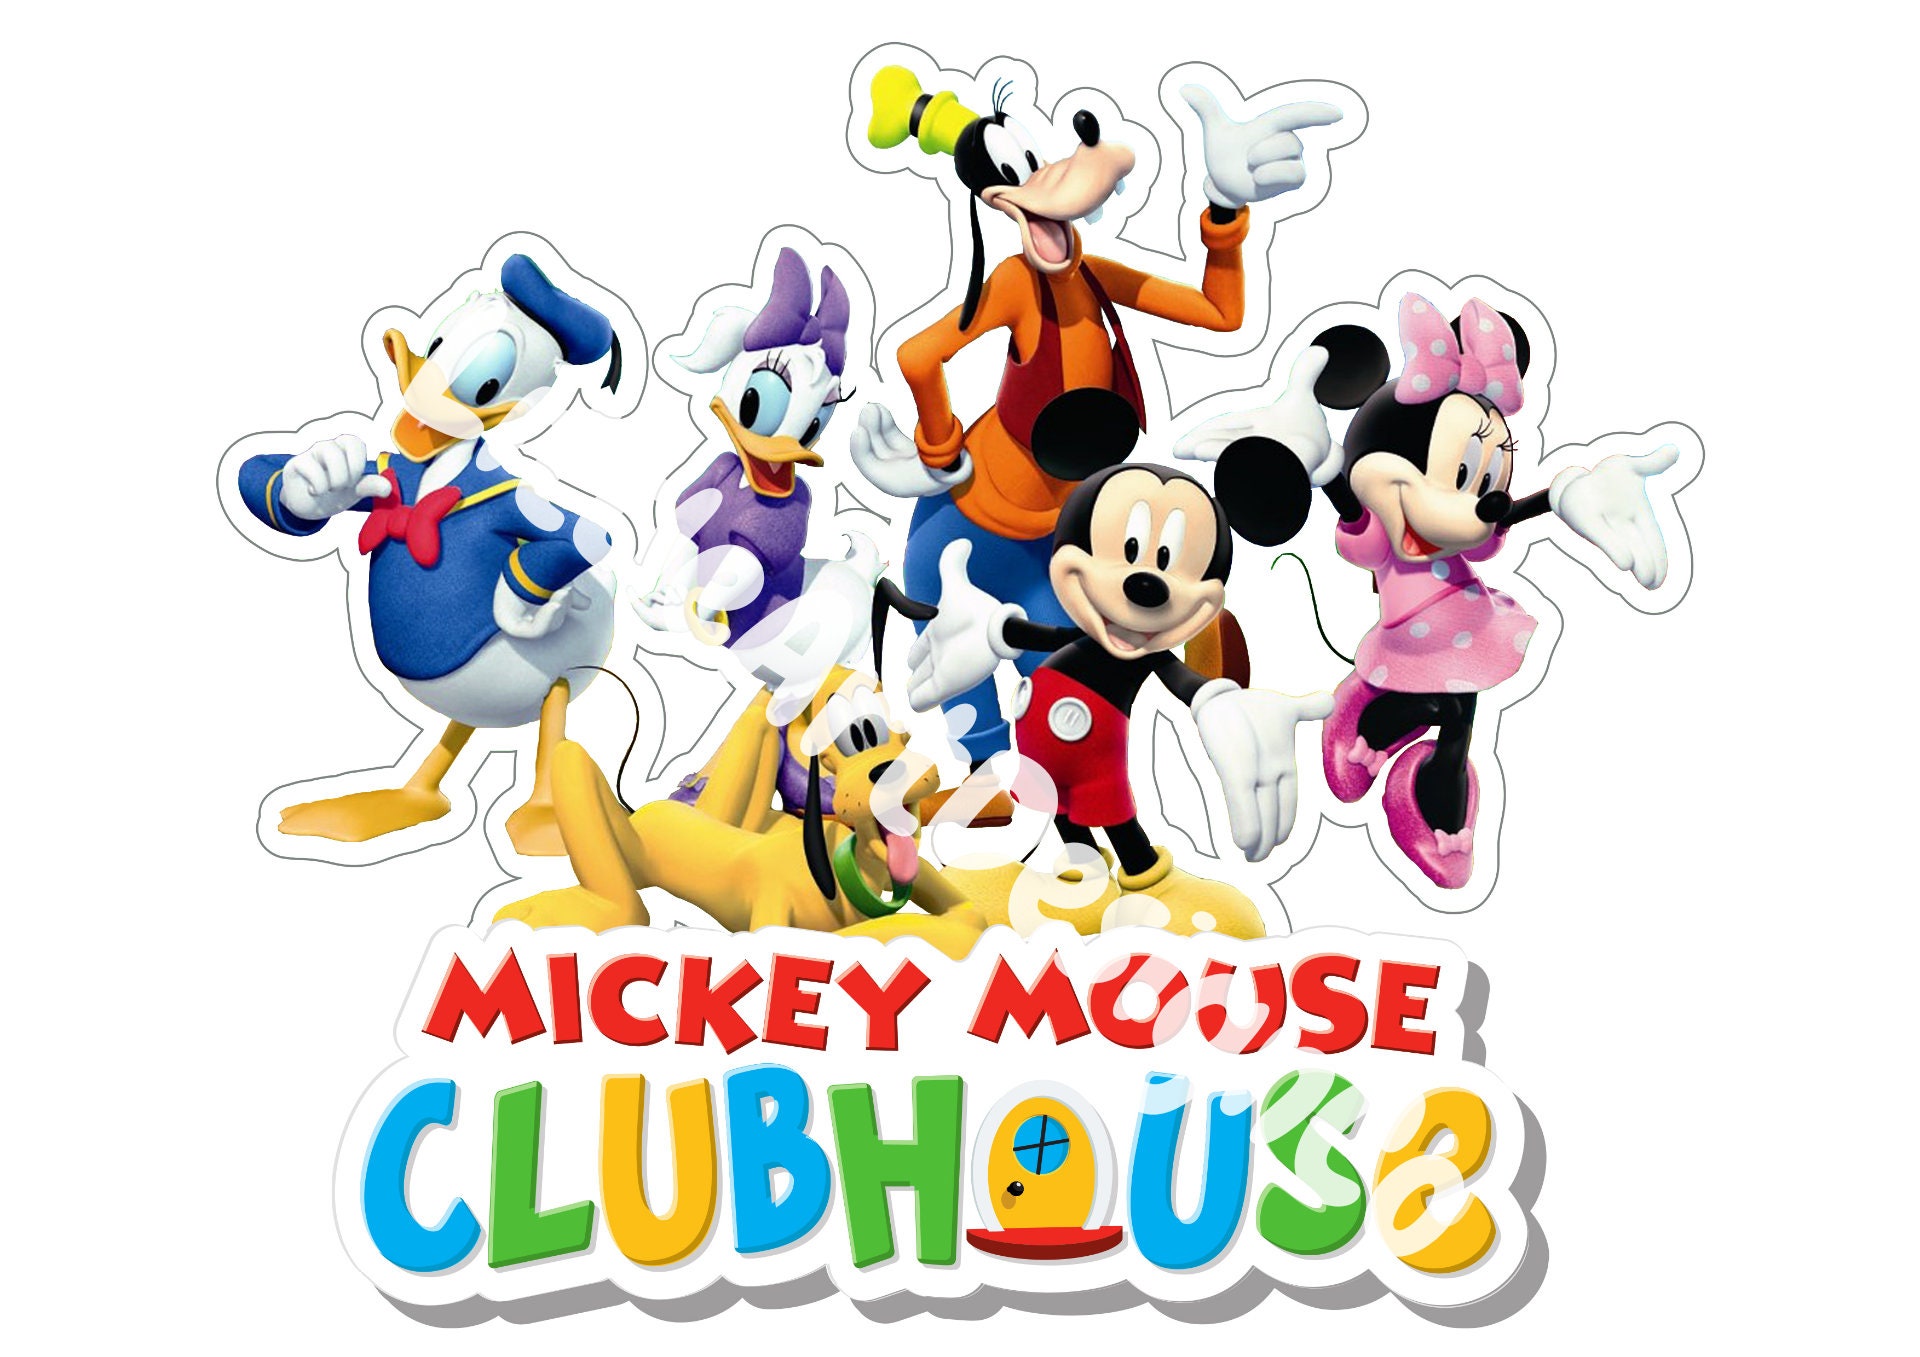 Printable Mickey PNG Mickey Mouse Club Hous Digital - Etsy Ireland